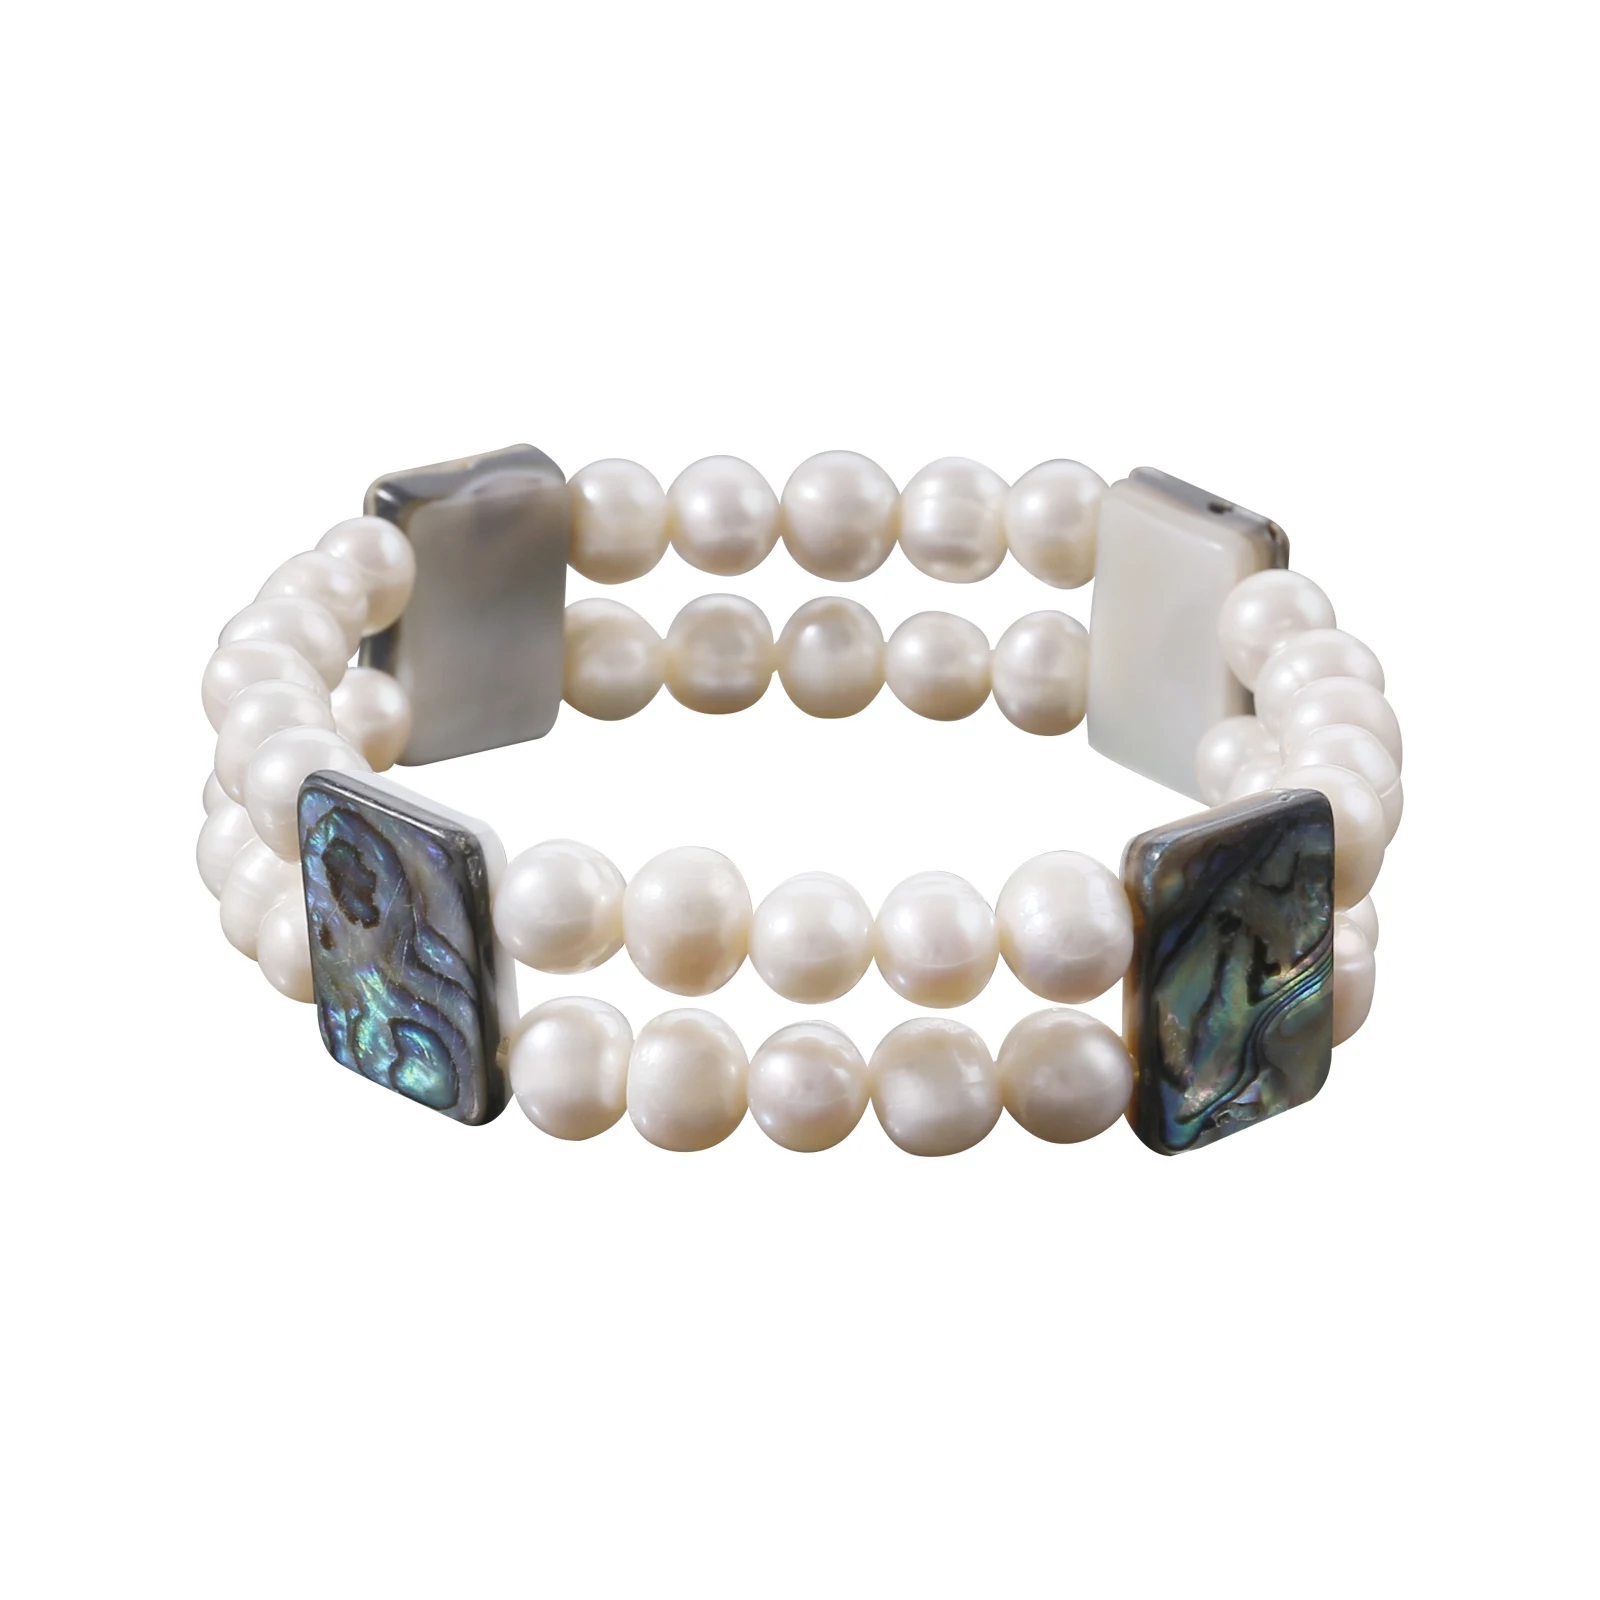 

Genuine Freshwater Pearl Stretch Bracelet With Square Shape Abalone Beads Fashion Two Row Pearl Jewelry Gift For Women And Men